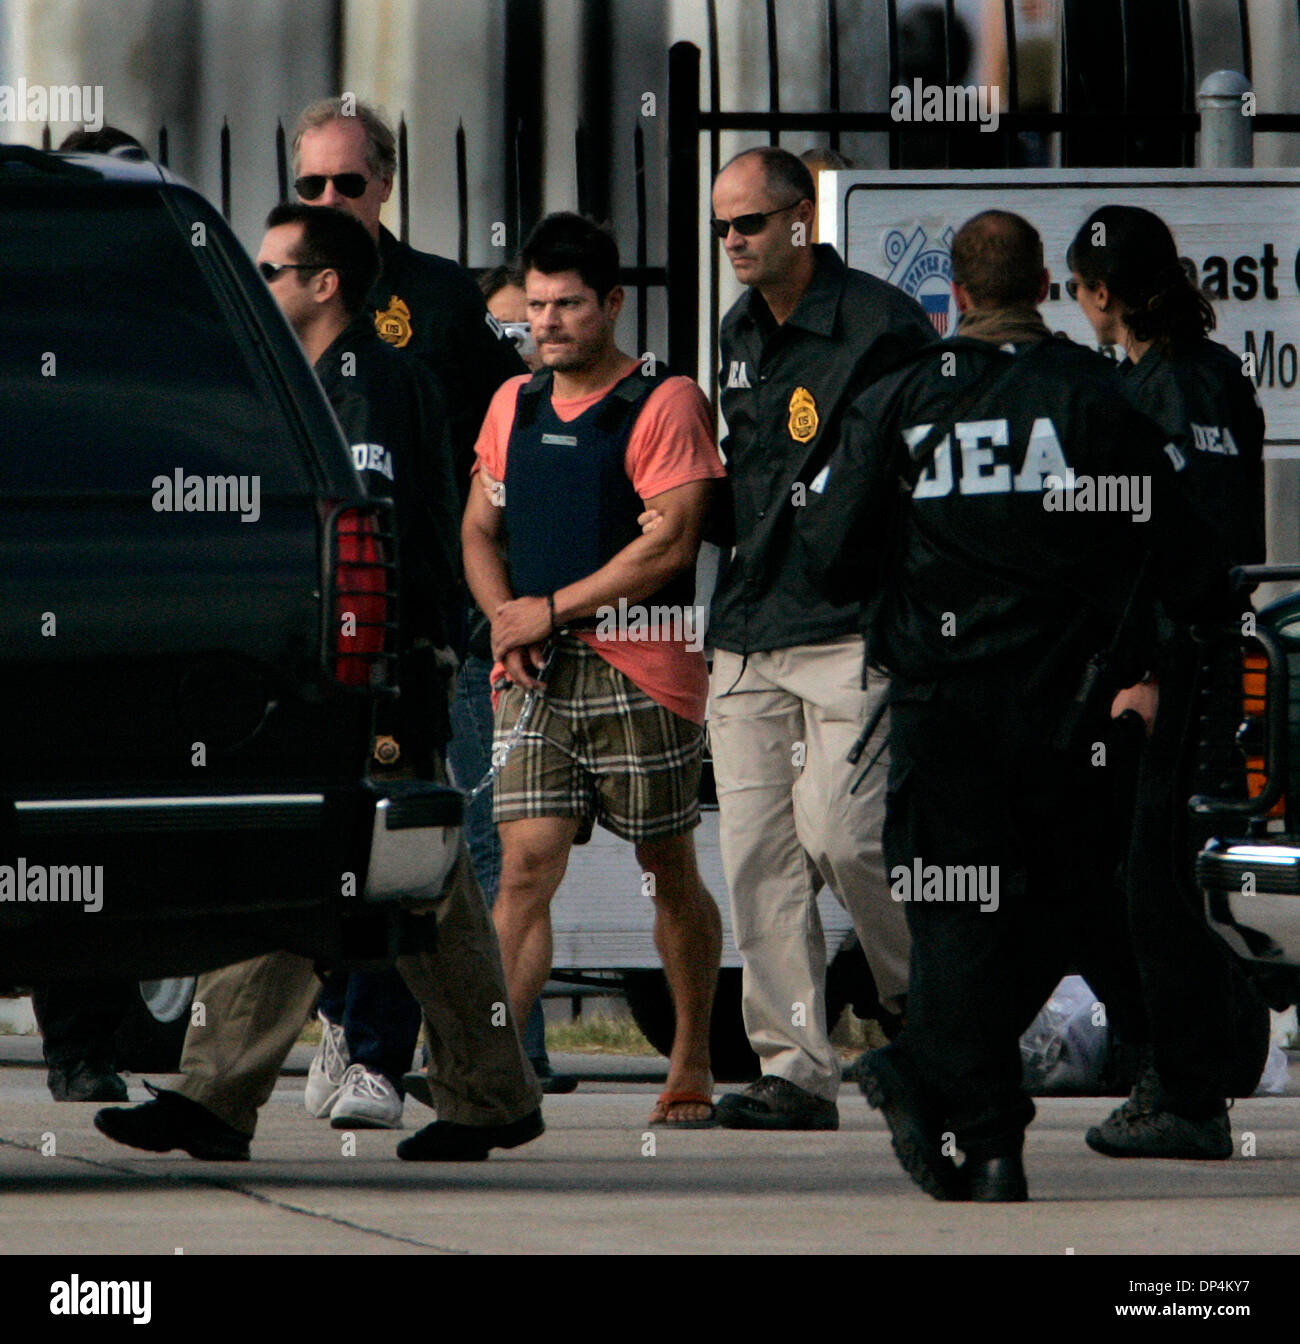 Aug 17, 2006; San Diego, CA, USA; Suspect FRANCISCO JAVIER ARELLANO FELIX  in the Arellano-Felix drug cartel is taken from a US Coast Guard vessel to a waiting DEA SUV at the San Diego Coast Guard Station. The suspects, as many as 11 were arrested in international waters off the coast of Baja California on Monday August 14, 2006 while they were deep-sea fishing. FRANCISCO JAVIER AR Stock Photo